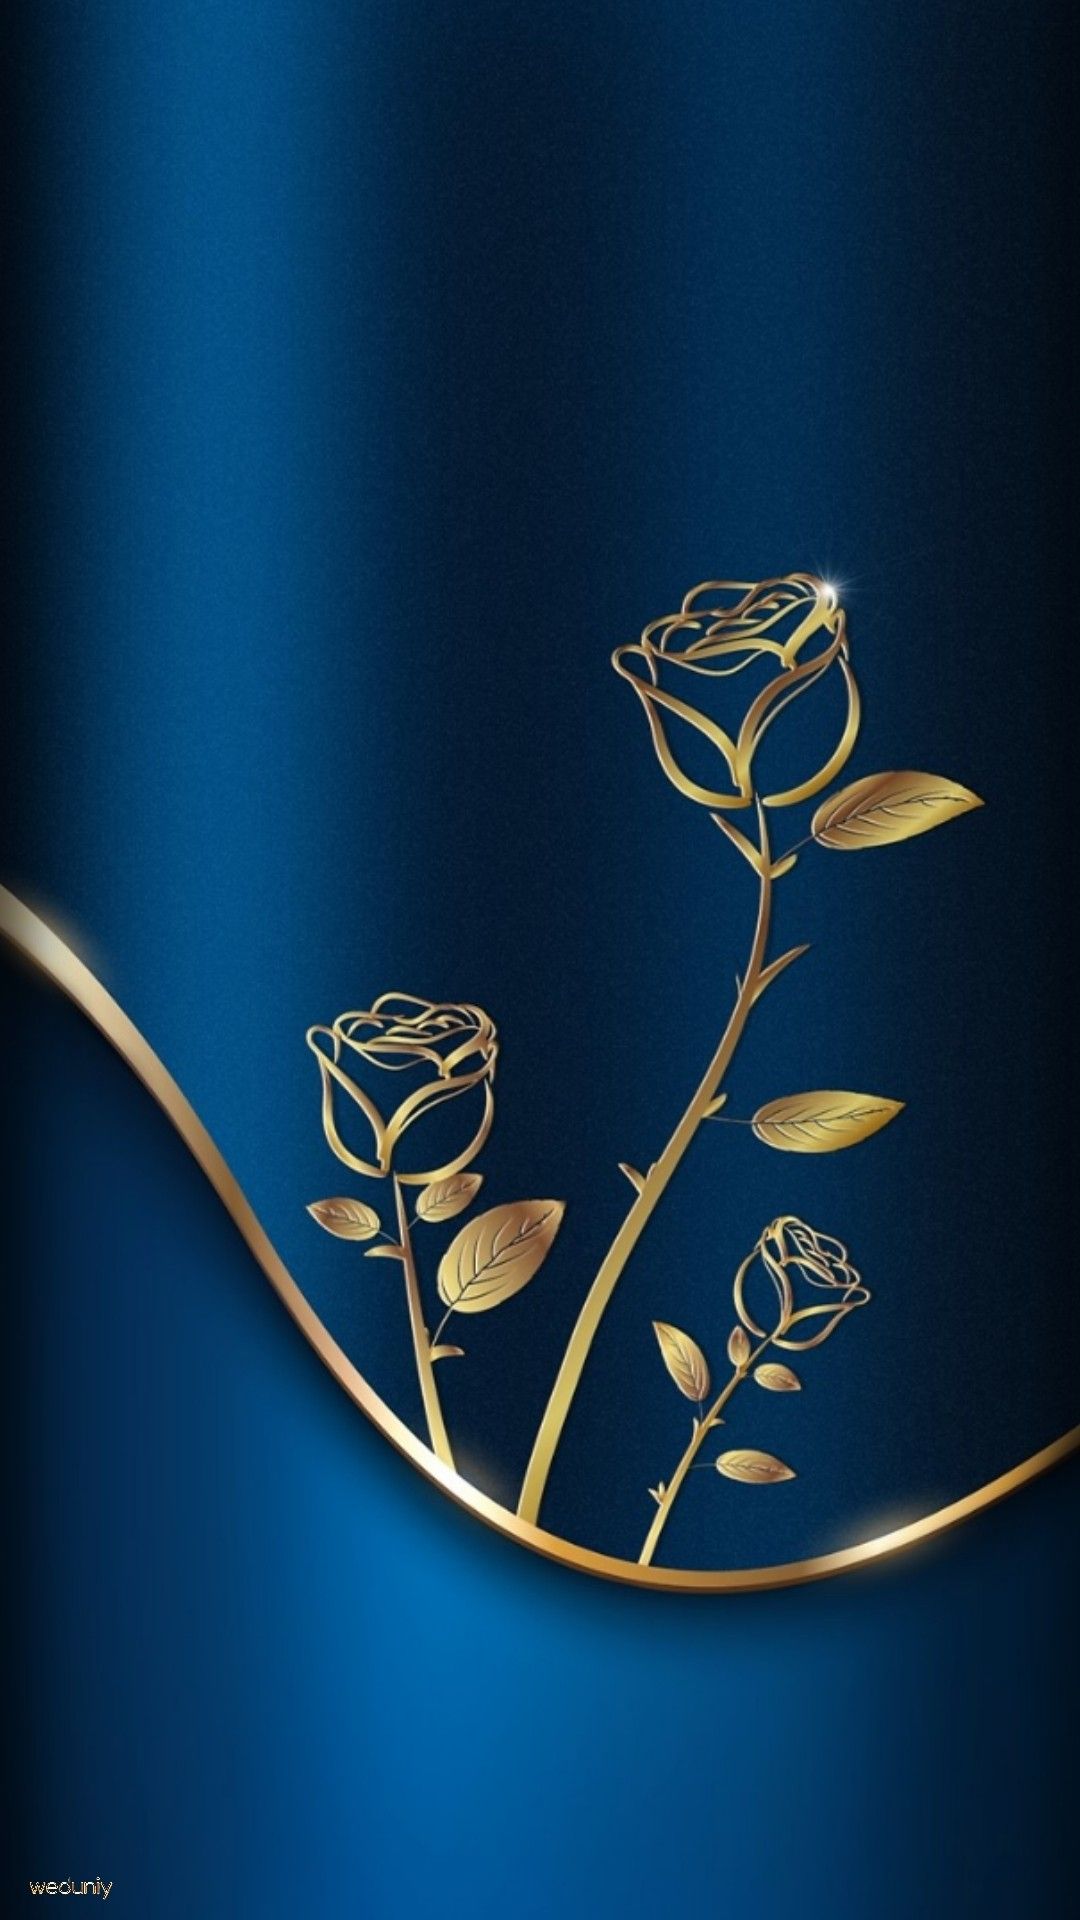 Wallpaper Blue Gold roses Gold wallpaper iphone Android